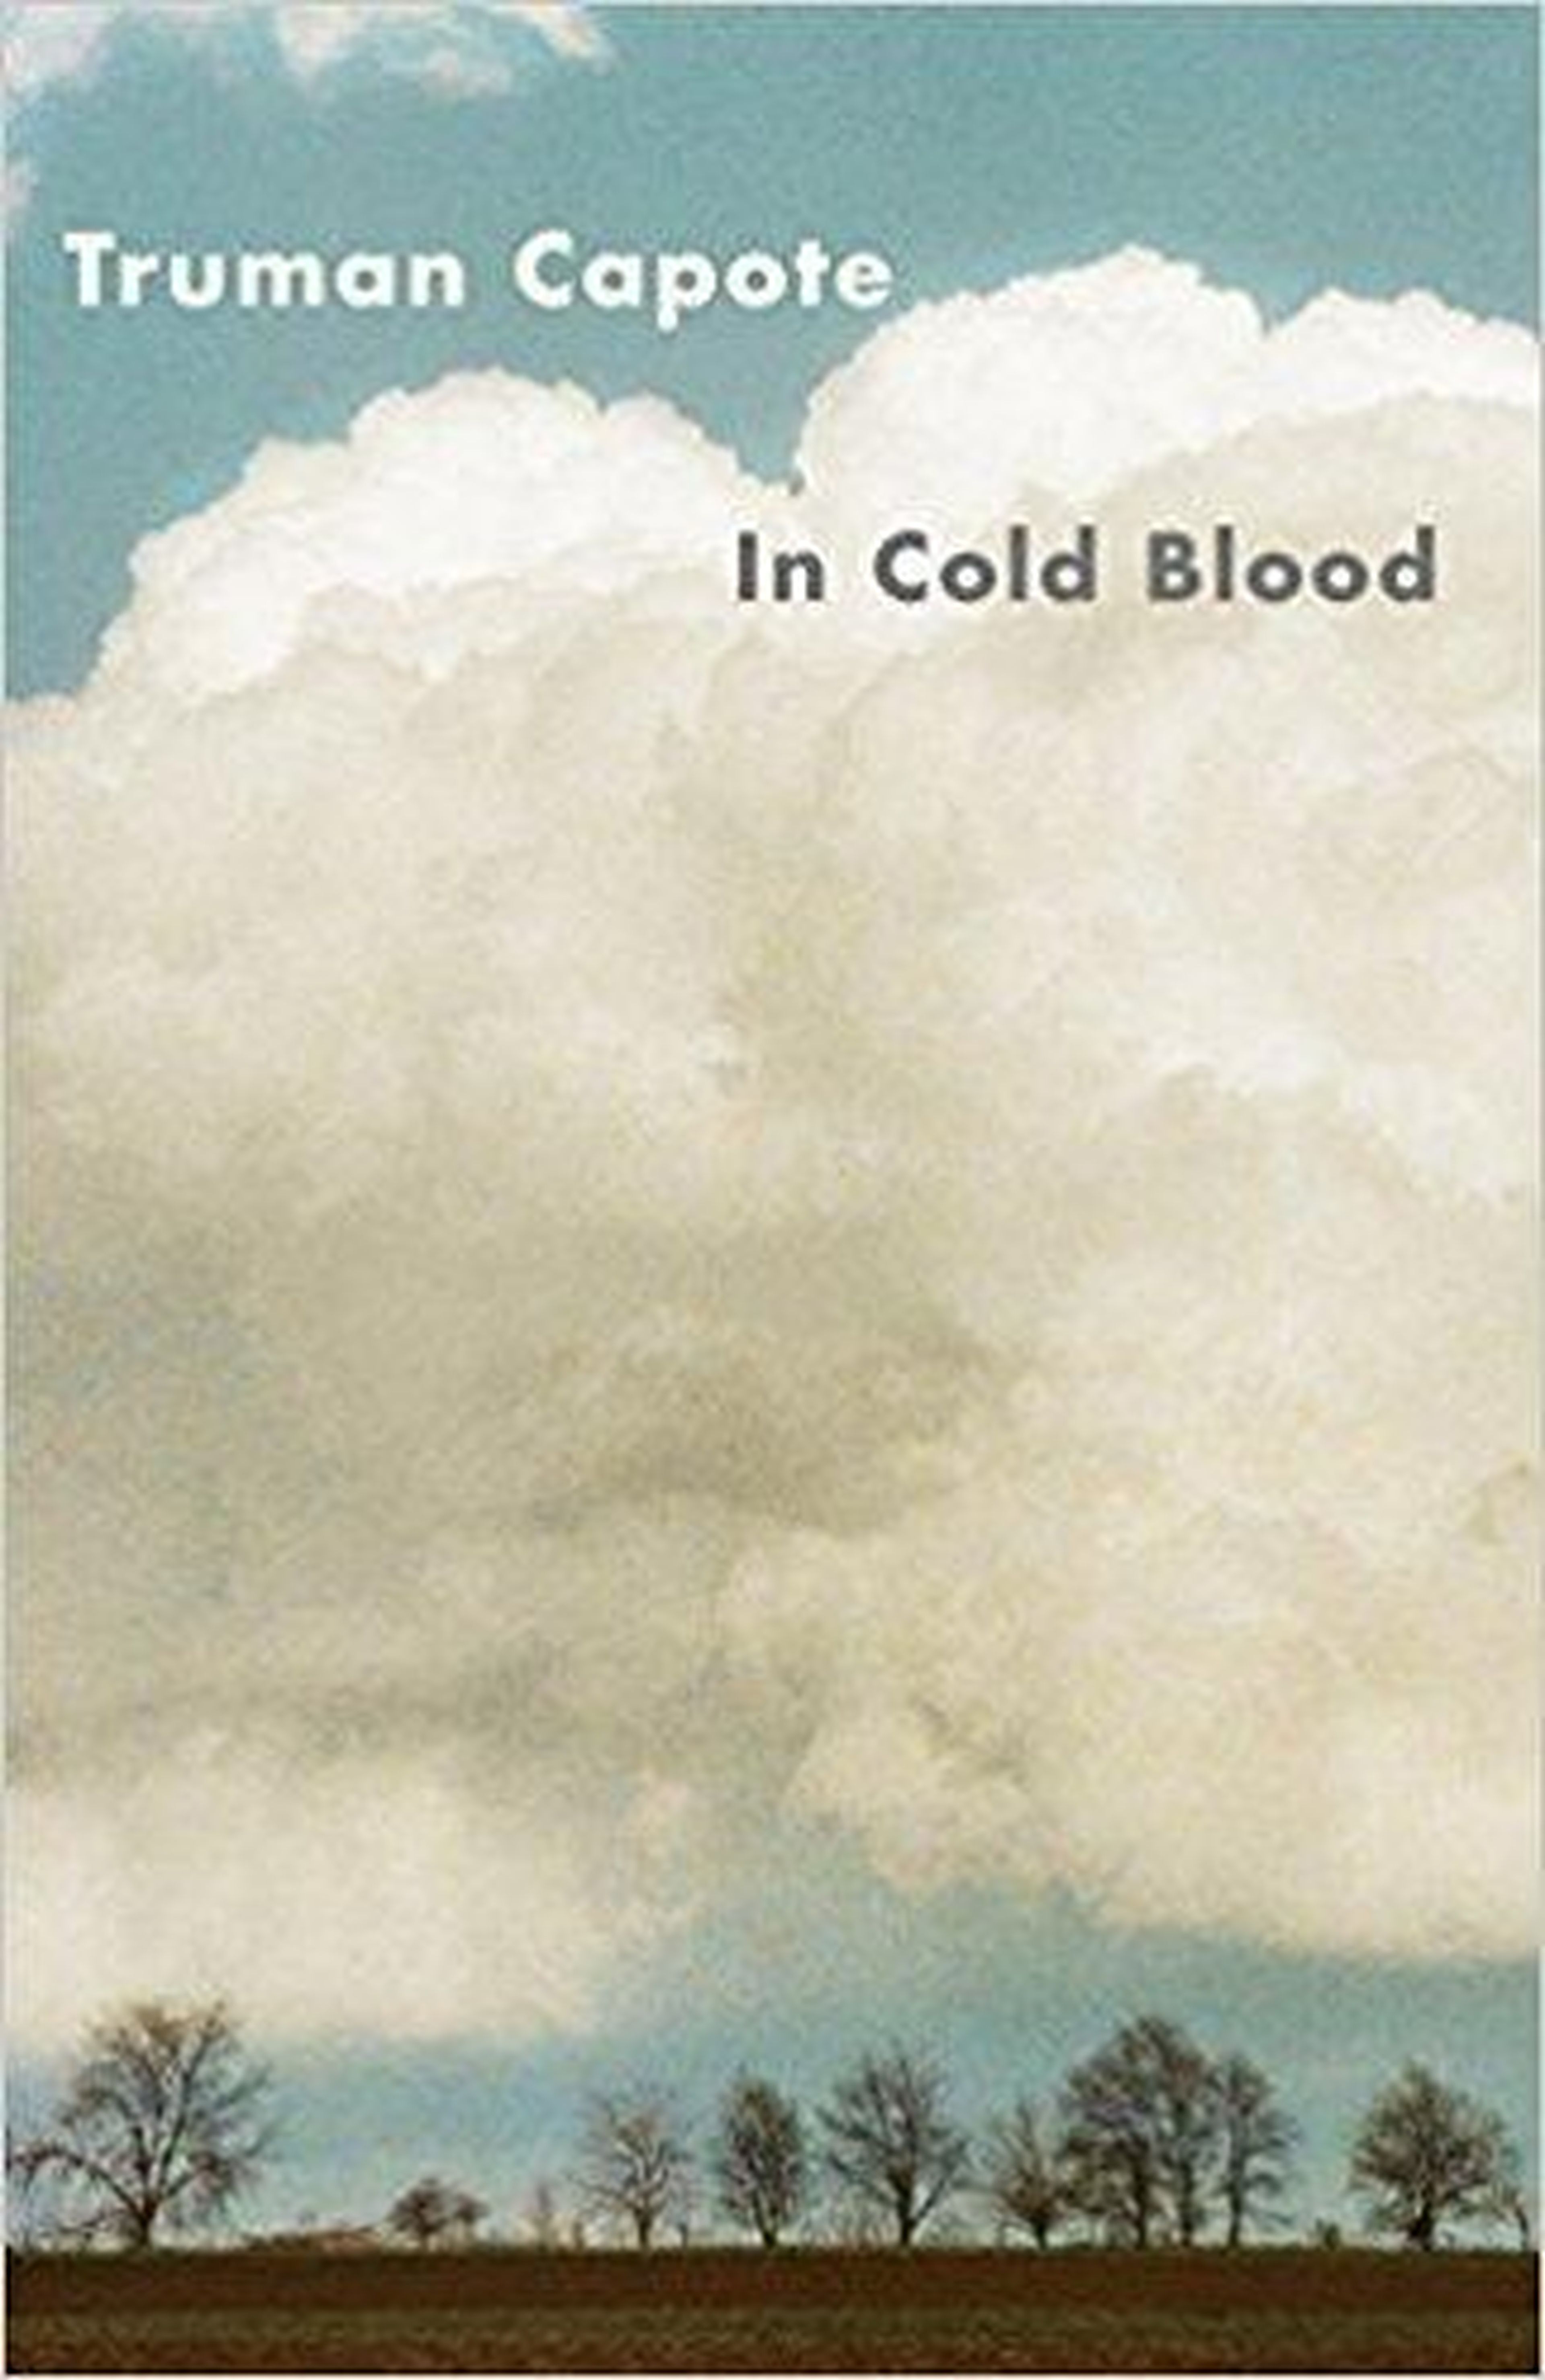 "In Cold Blood."